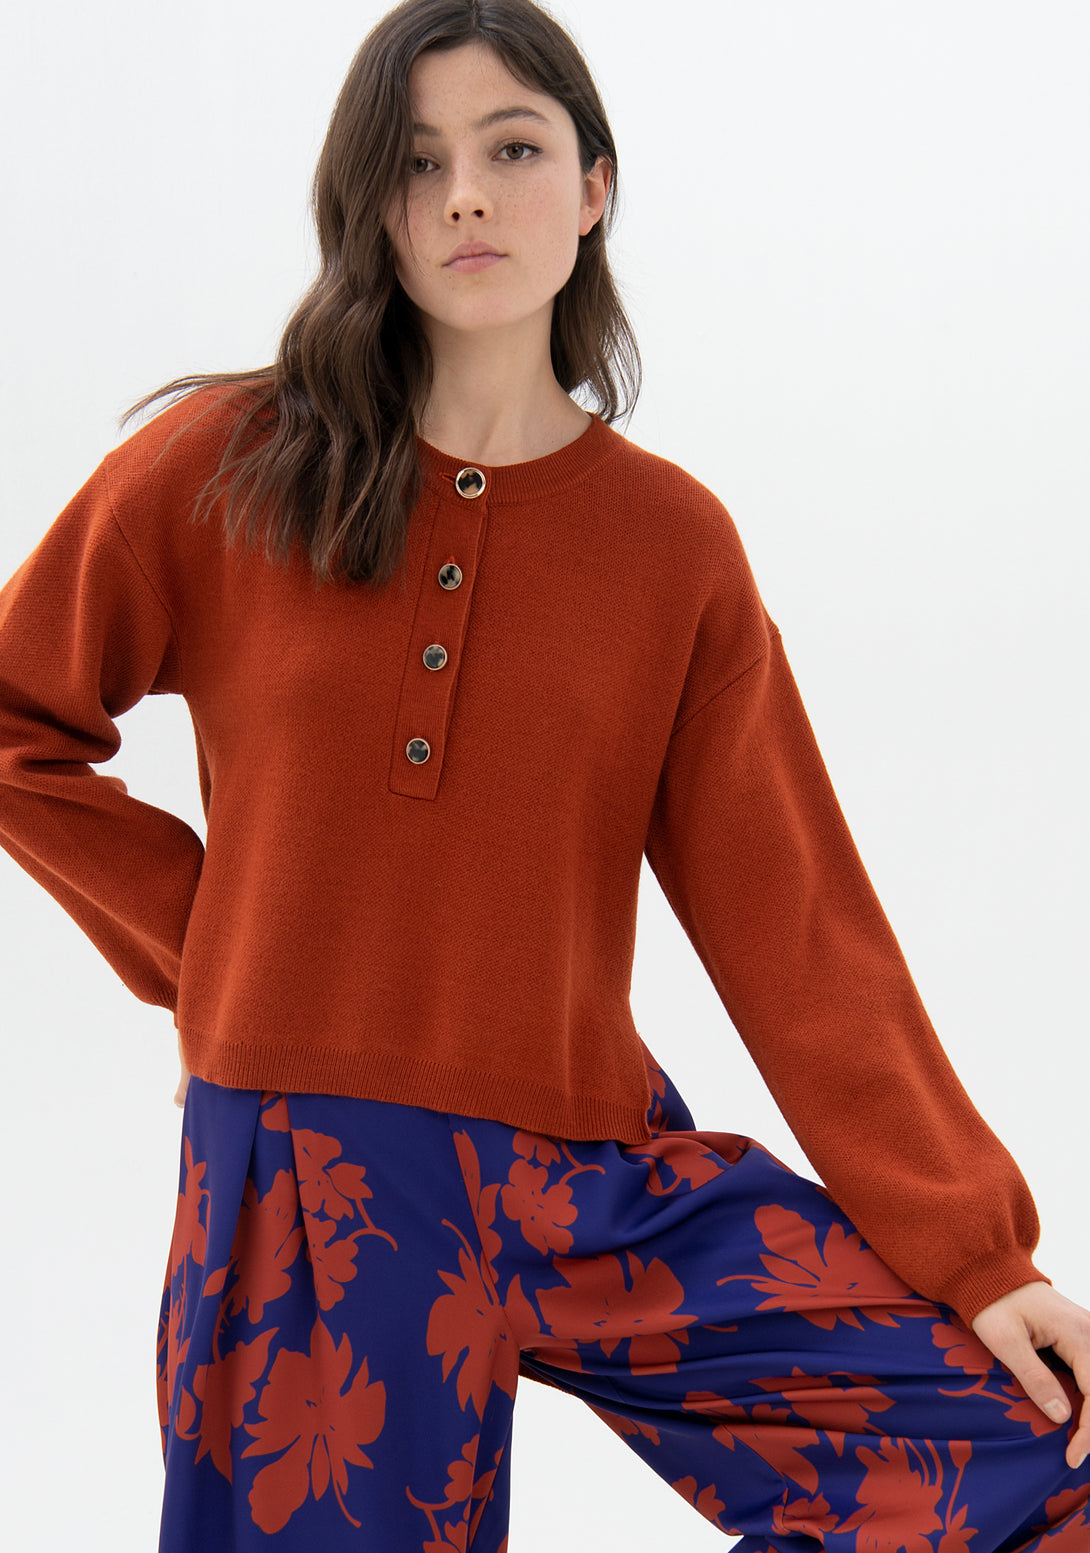 Knitwear regular fit with jewel buttons